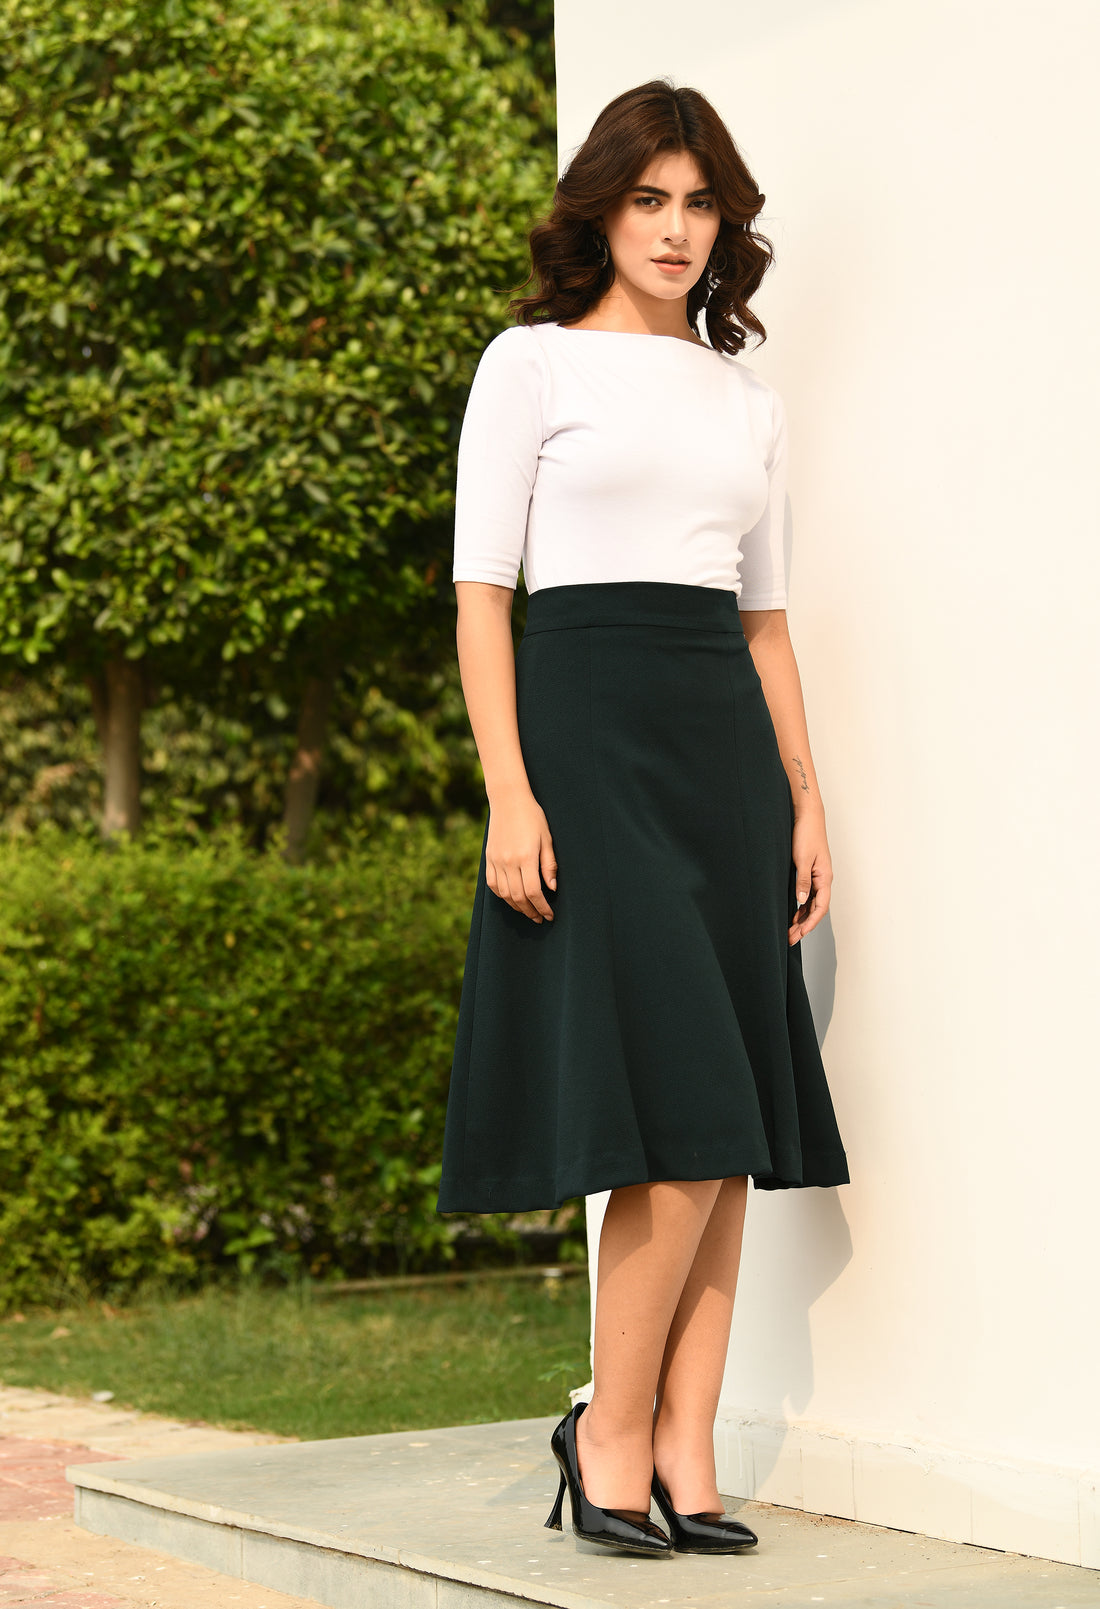 Exude Victory A-line Midi Skirt (Emerald Green)